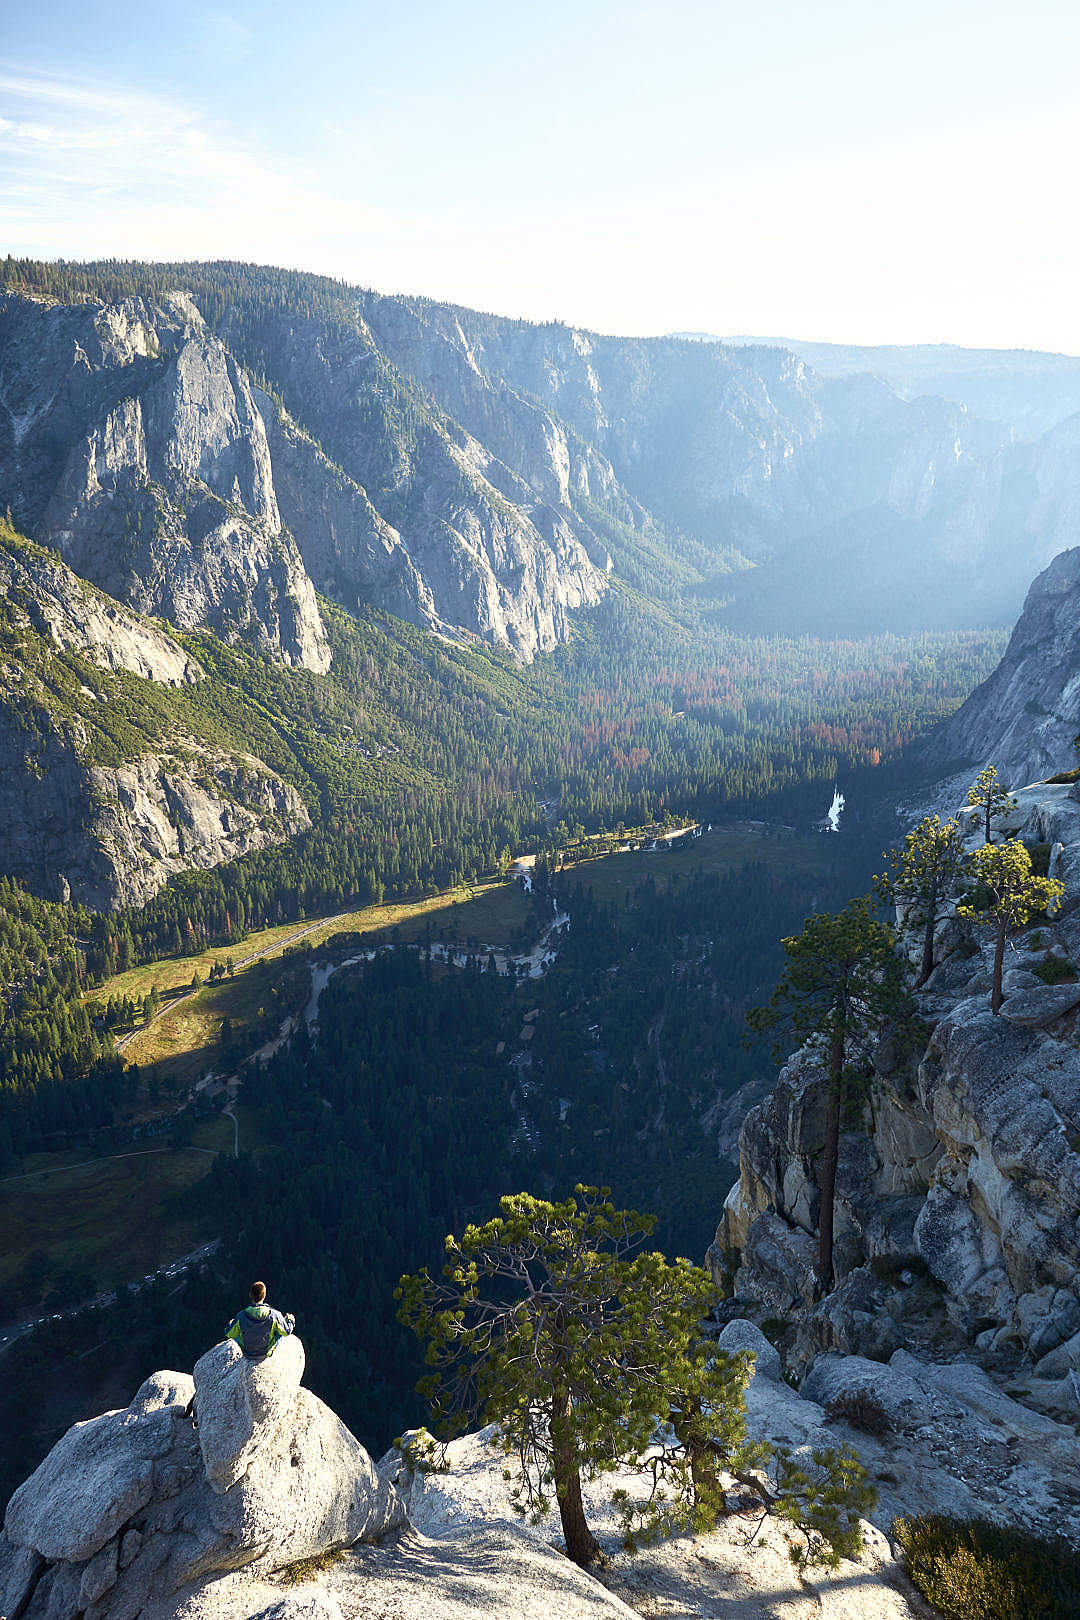 Download Man Enjoying The View into The Yosemite Valley Vertical FREE Stock Photo